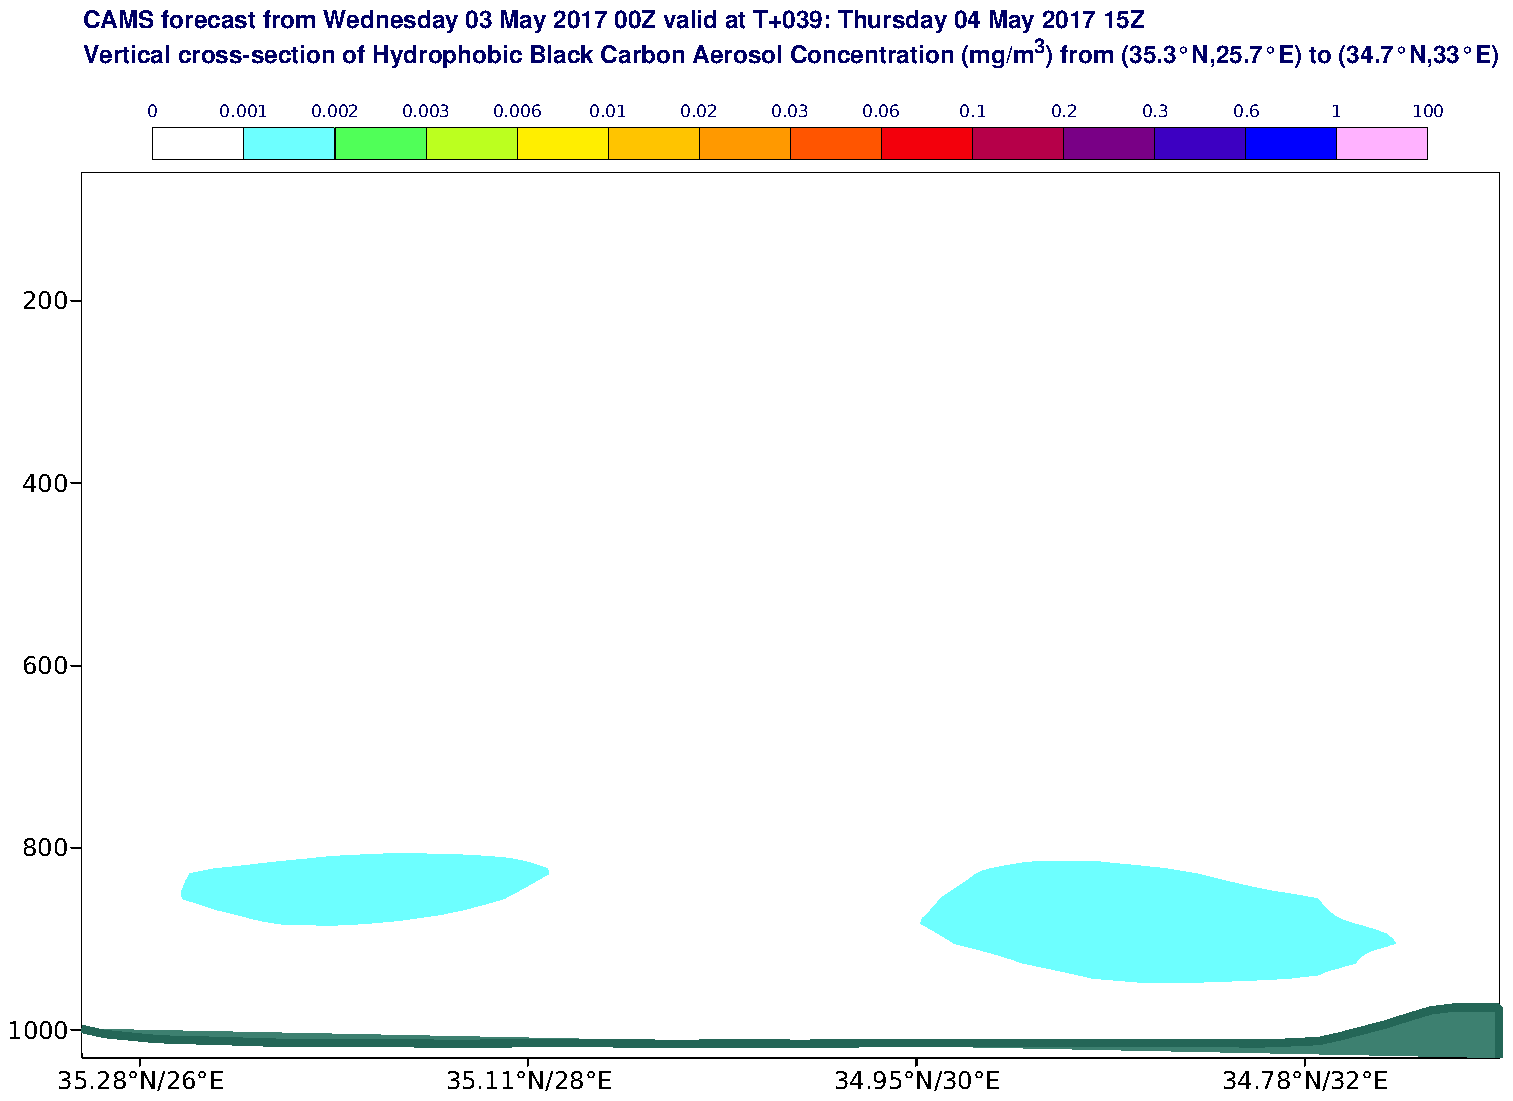 Vertical cross-section of Hydrophobic Black Carbon Aerosol Concentration (mg/m3) valid at T39 - 2017-05-04 15:00